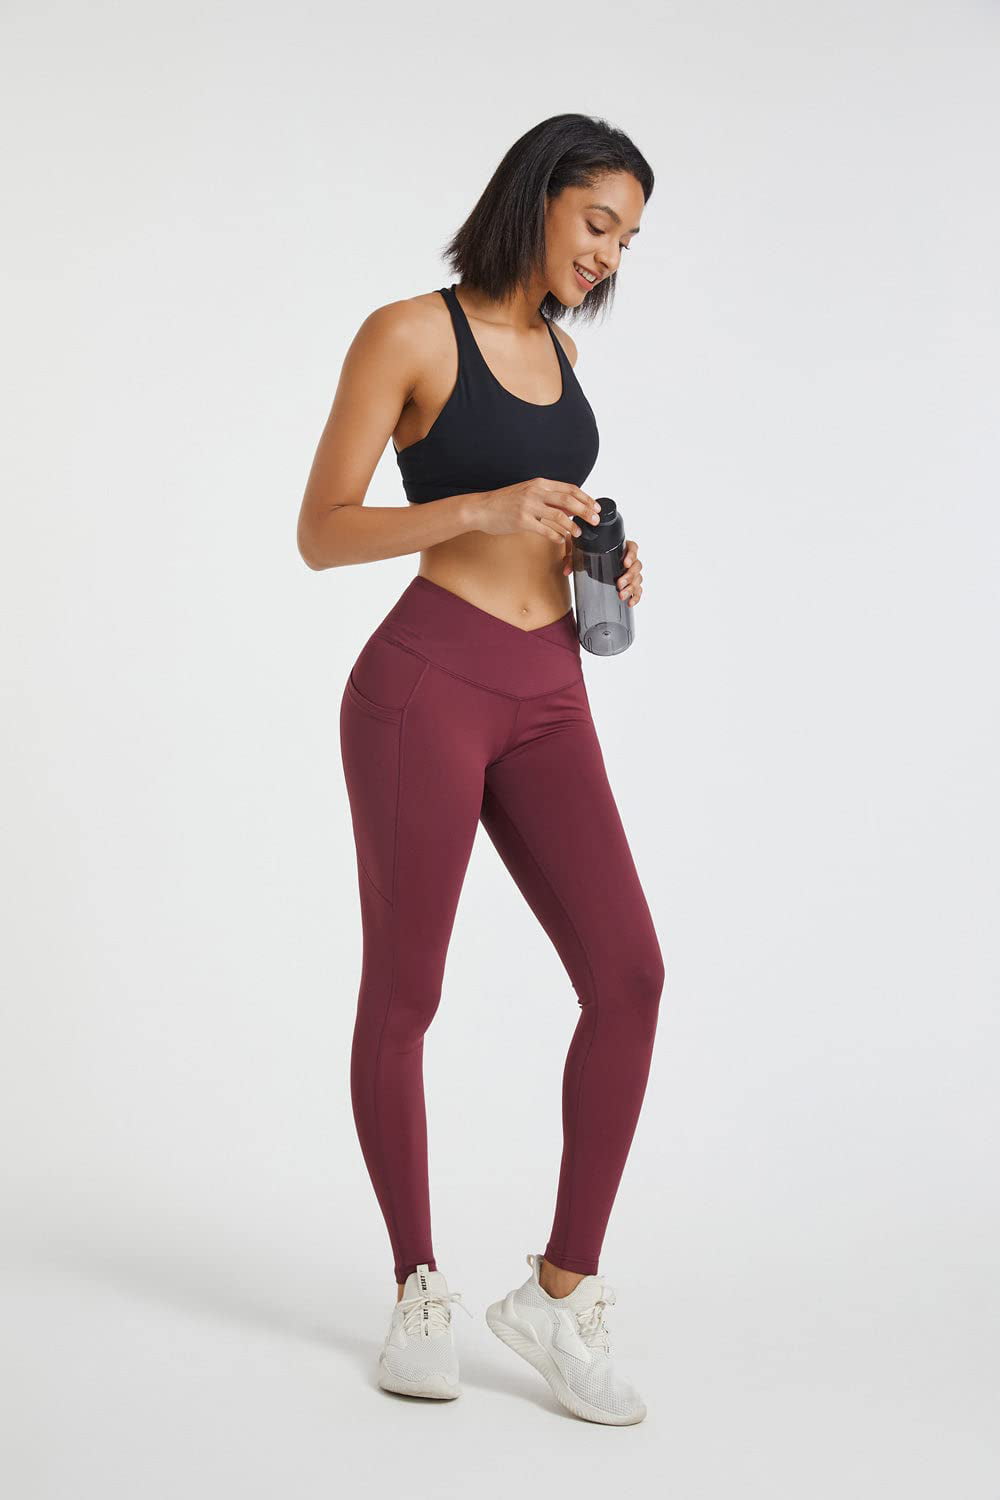 Move My Direction Leggings (Burgundy) – Sunday's Best Boutique